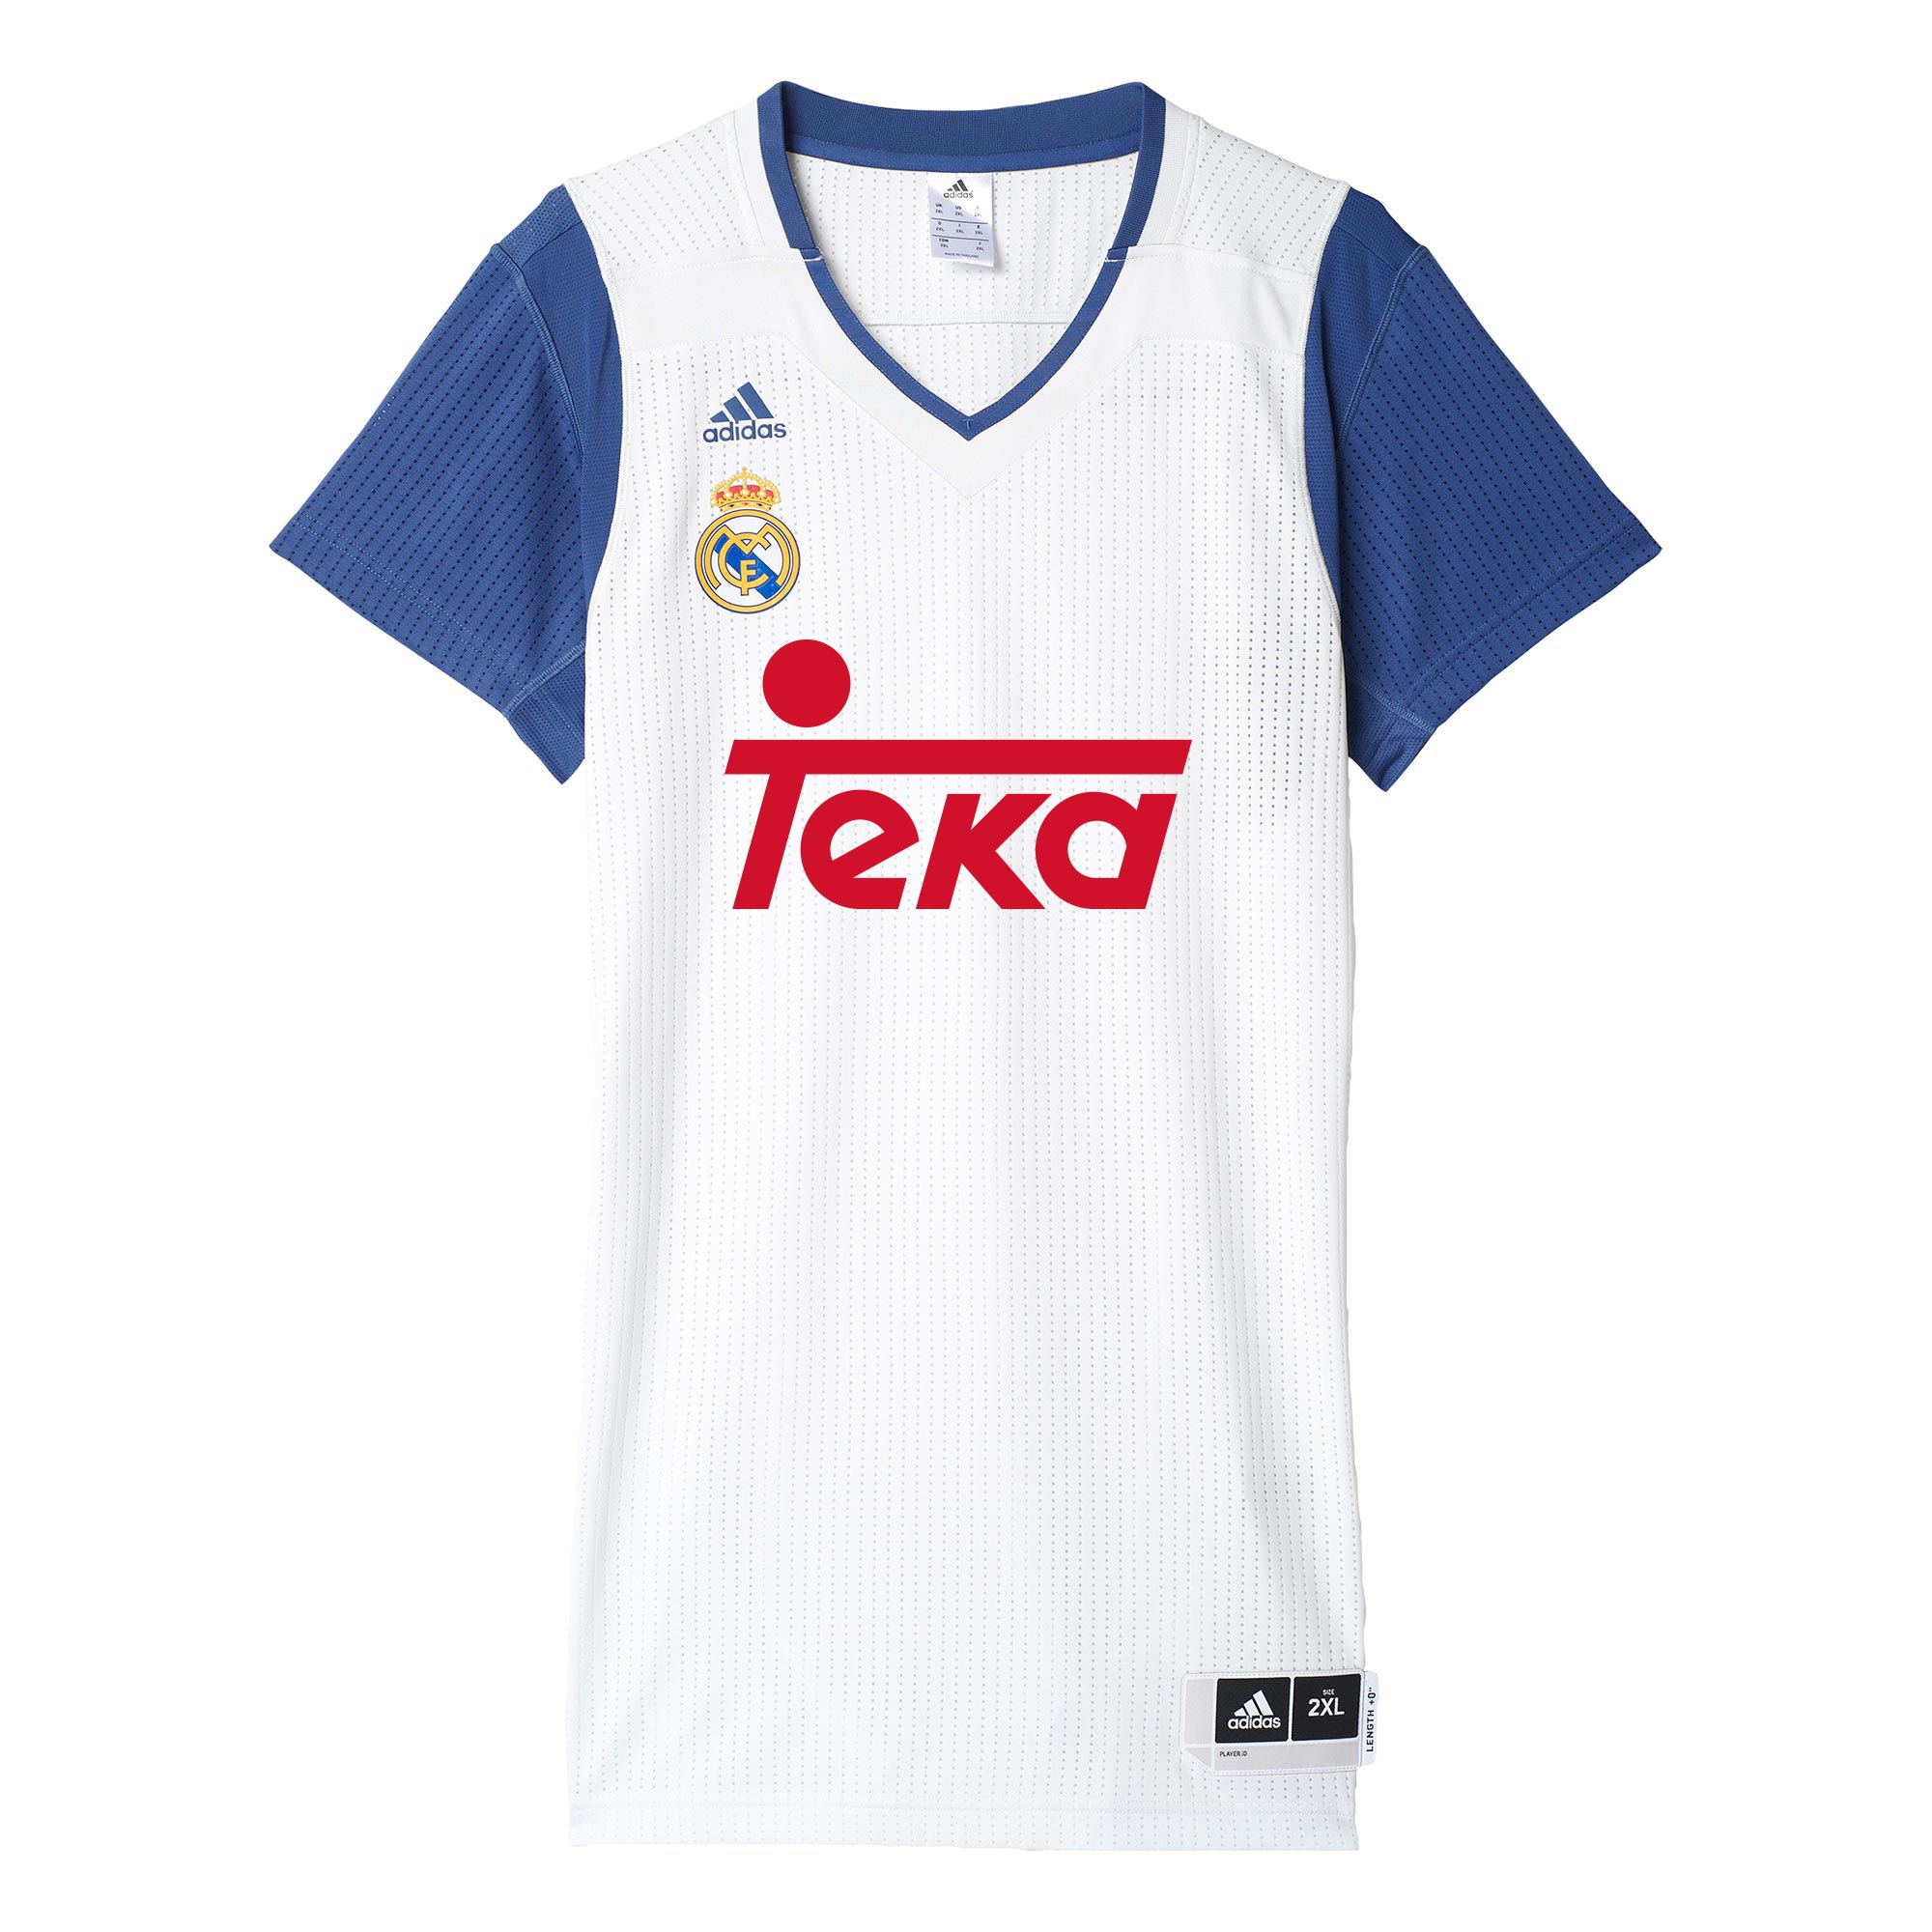 Real Madrid Basketball Jersey - White